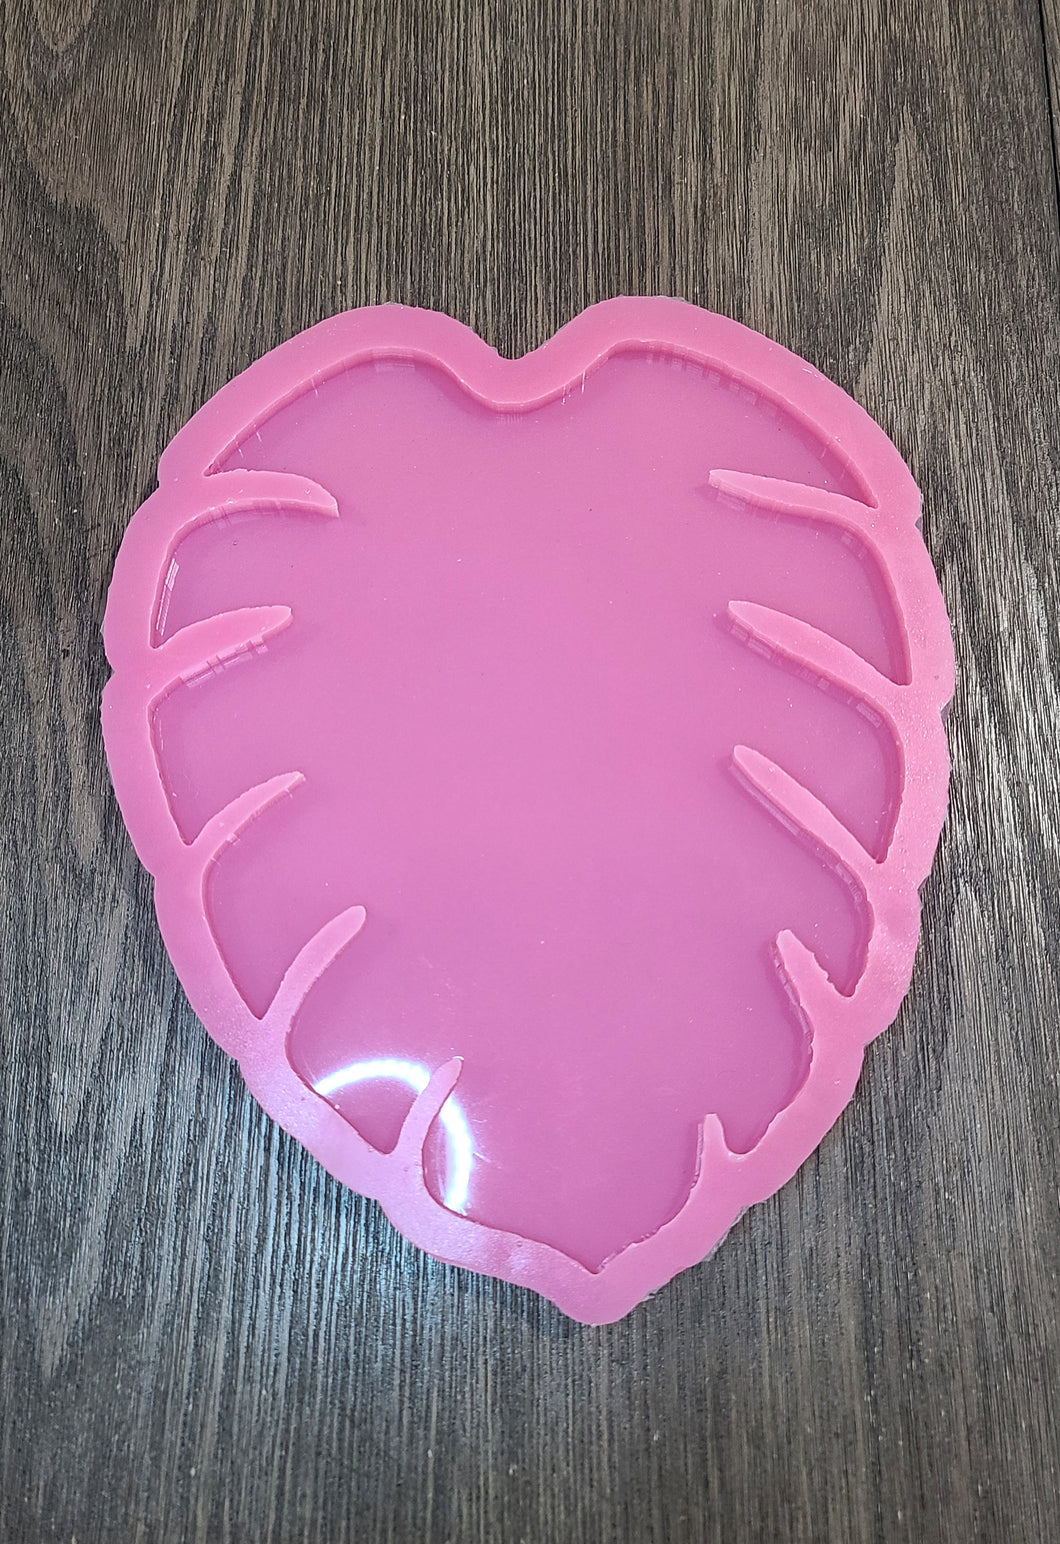 USED MOLD - Large 8 inch Monstera Leaf Tray Silicone Mold